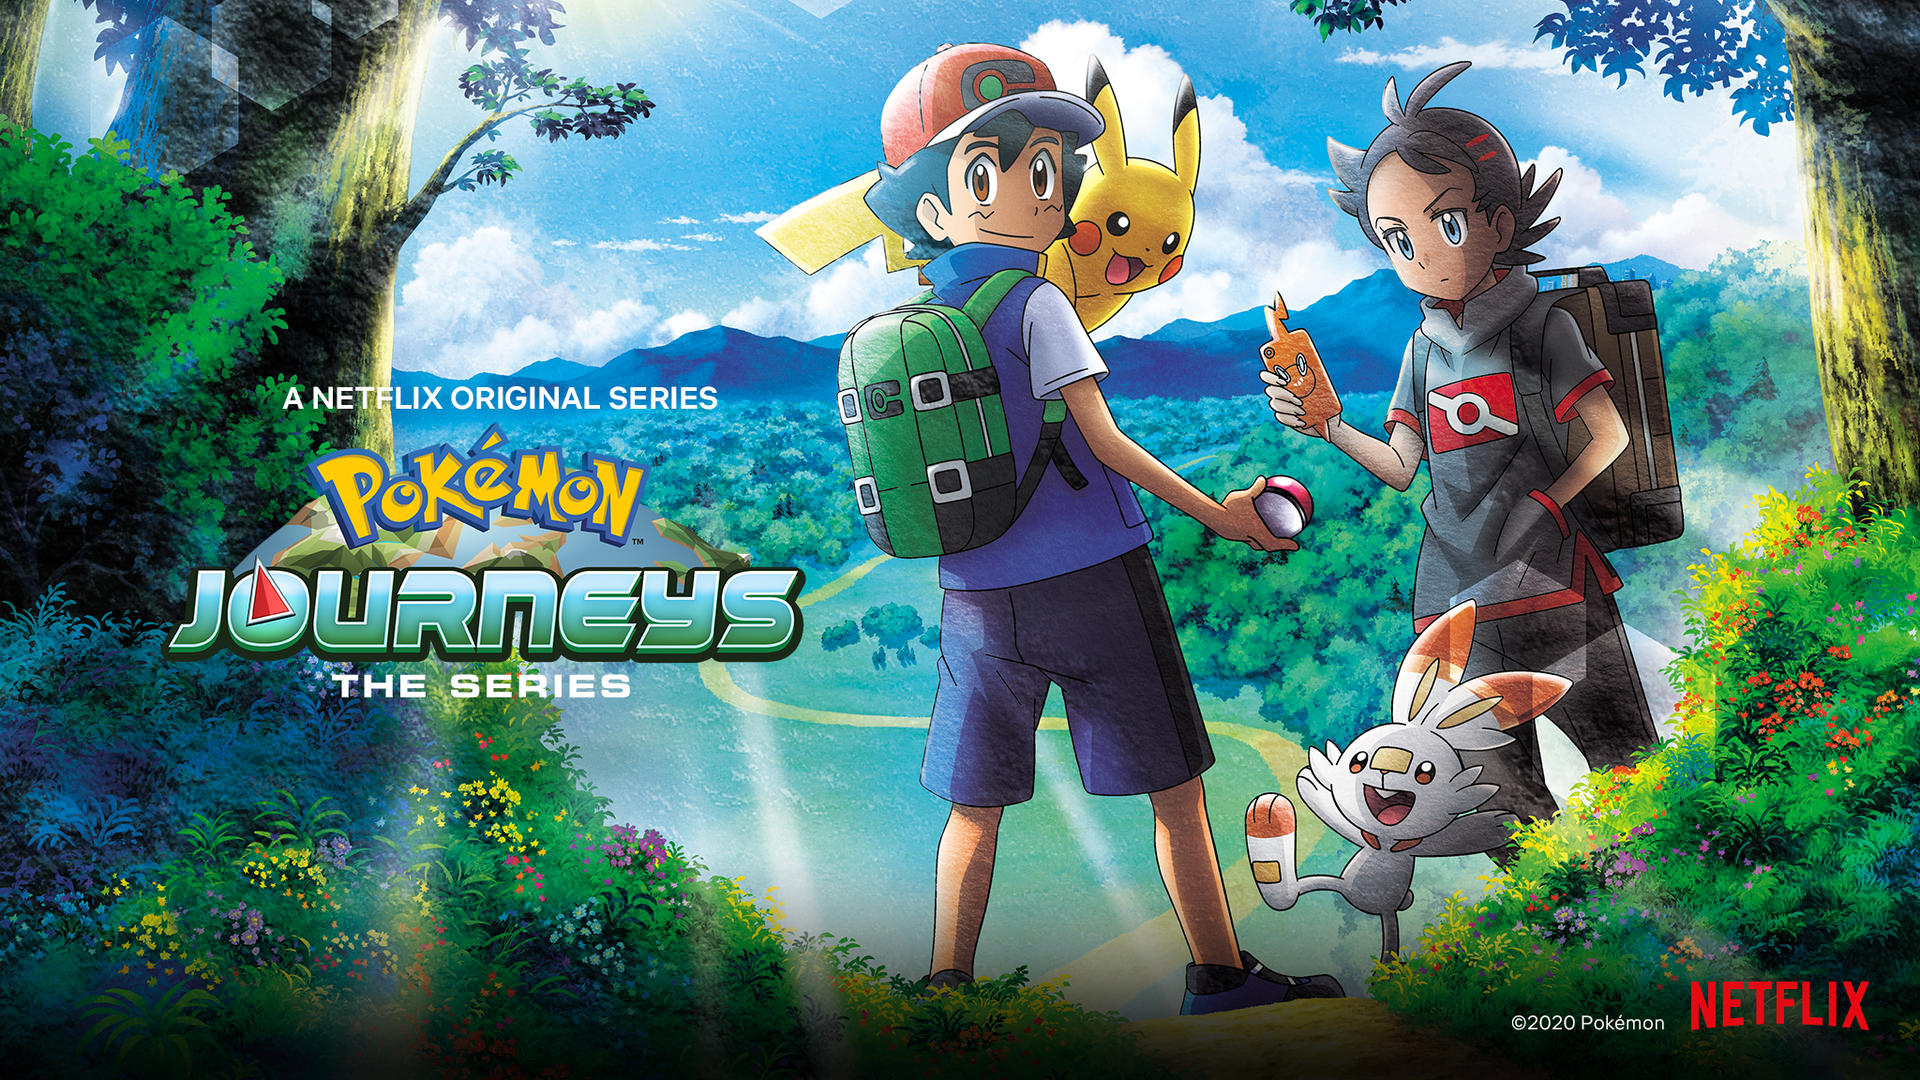 Pokémon Journeys: The Series premieres exclusively on Netflix in the US